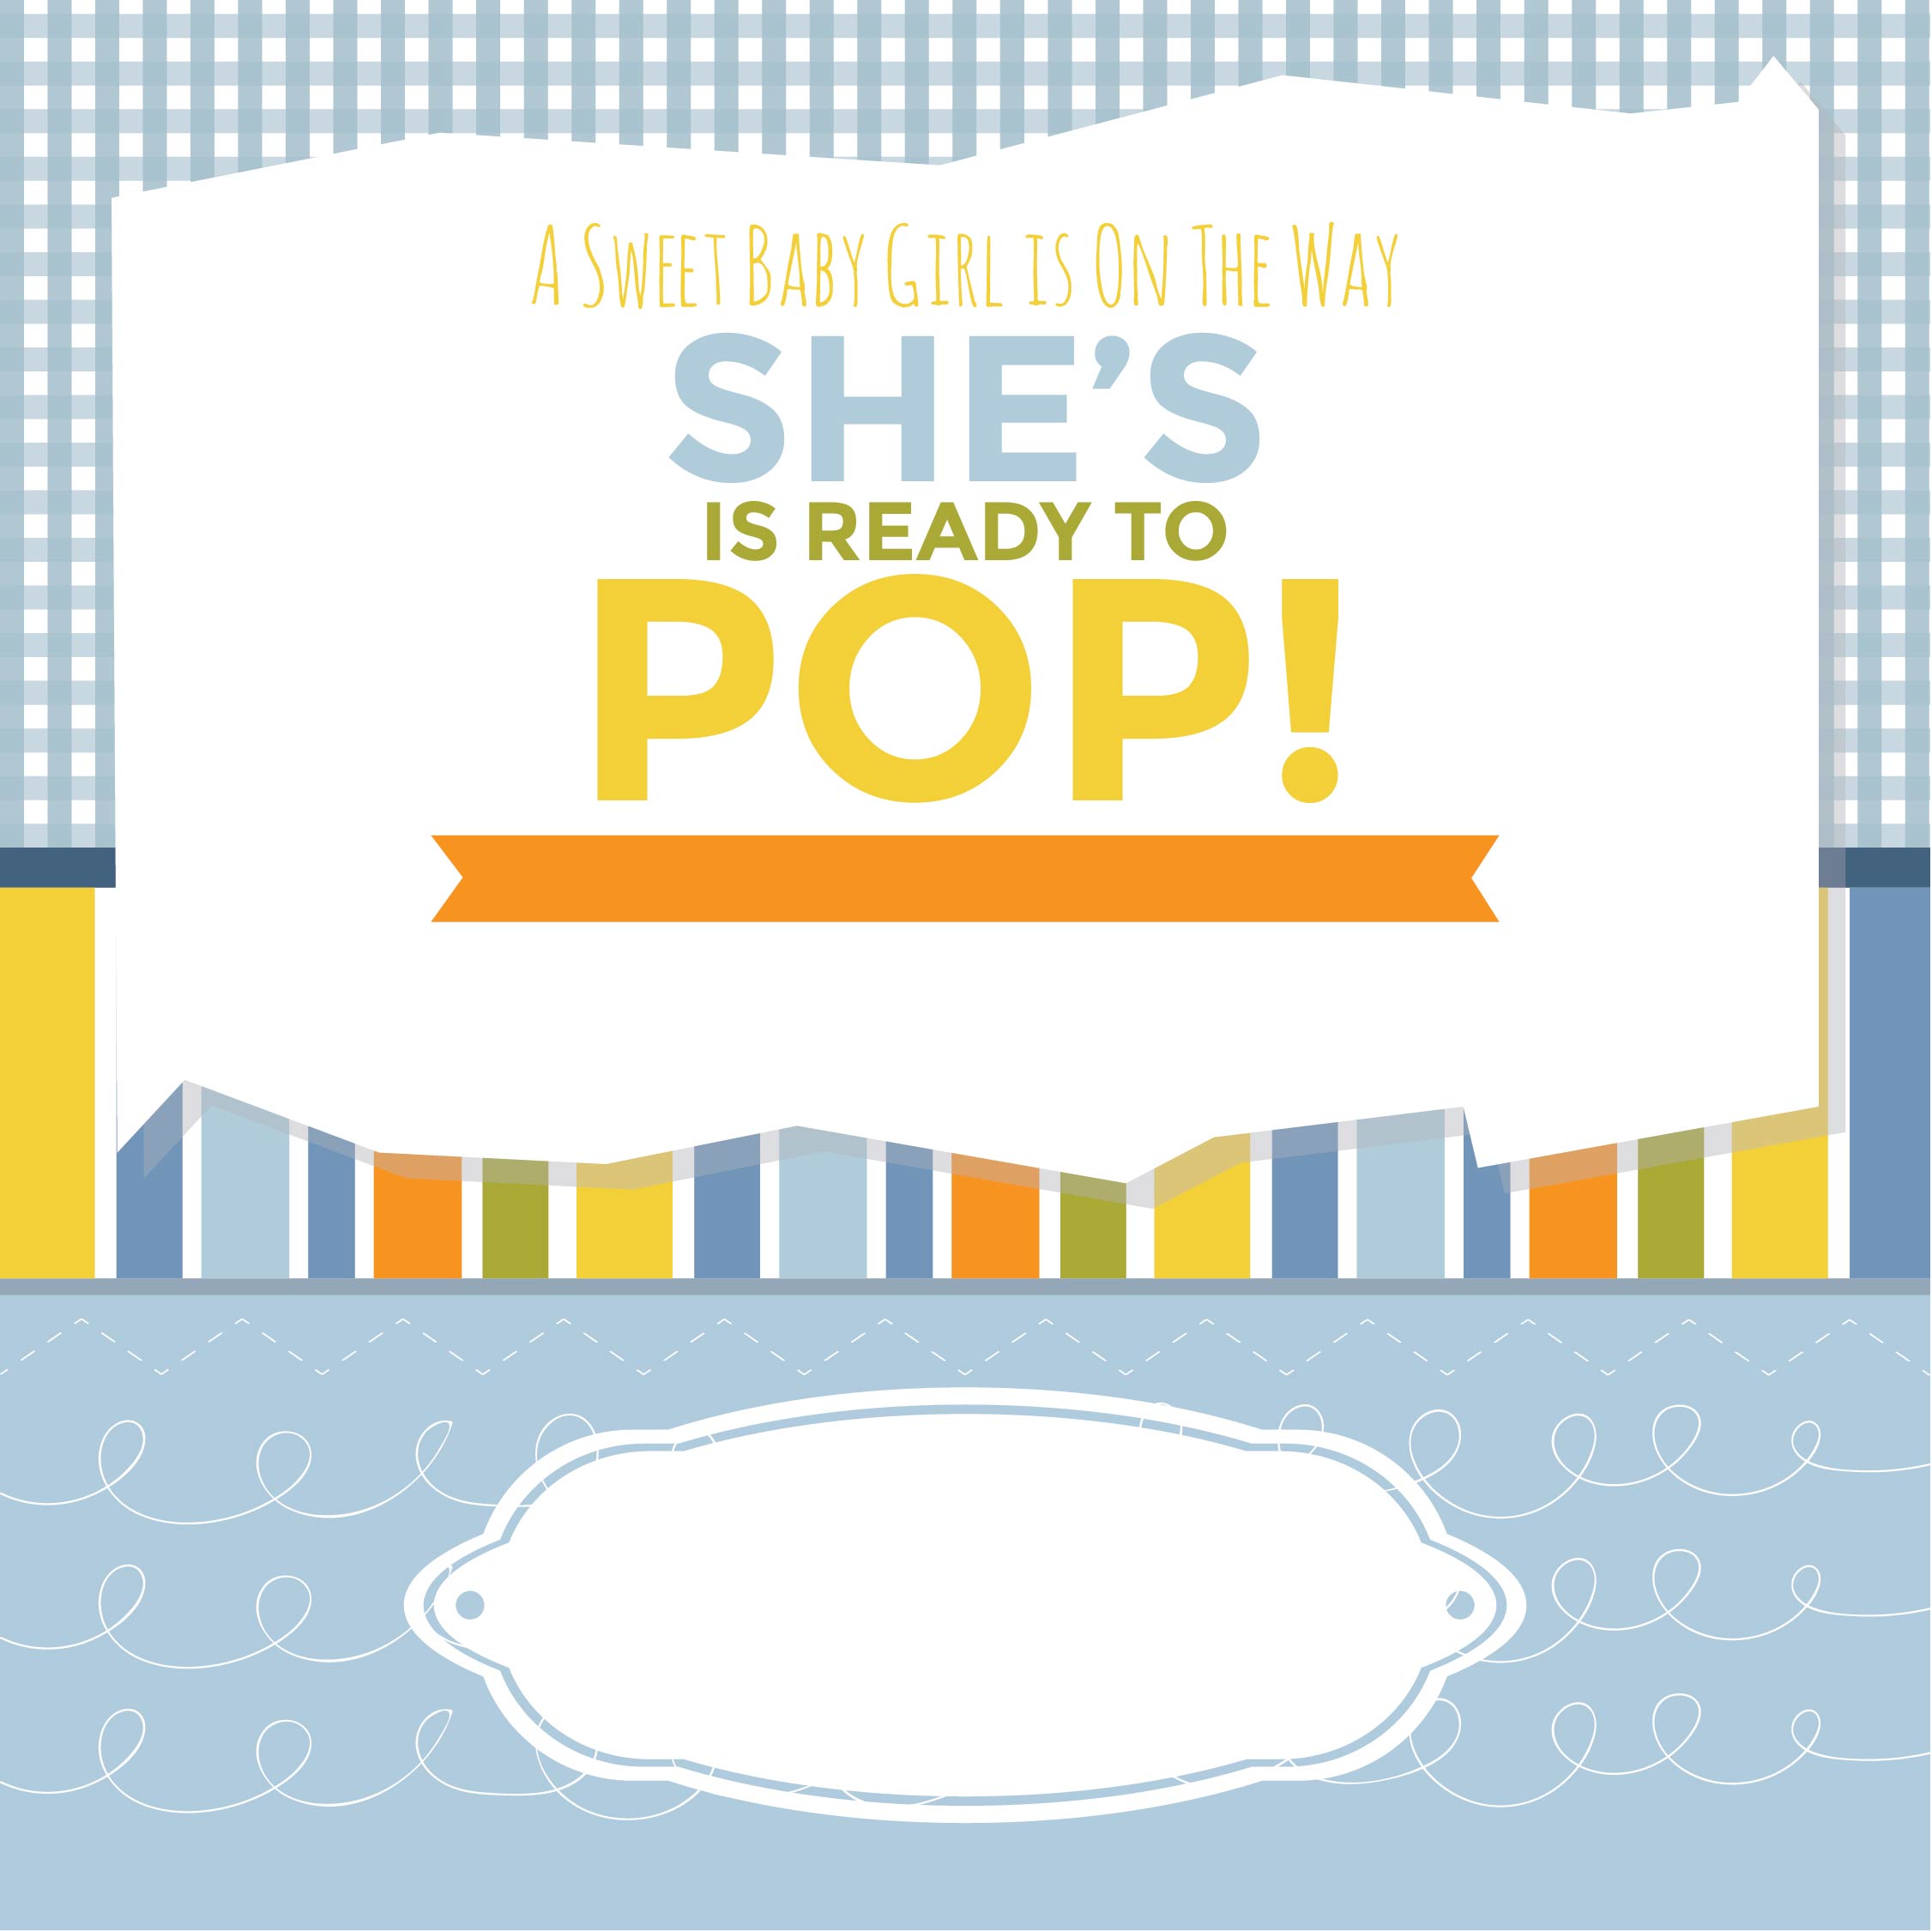 Ready to Pop Baby Shower Printables